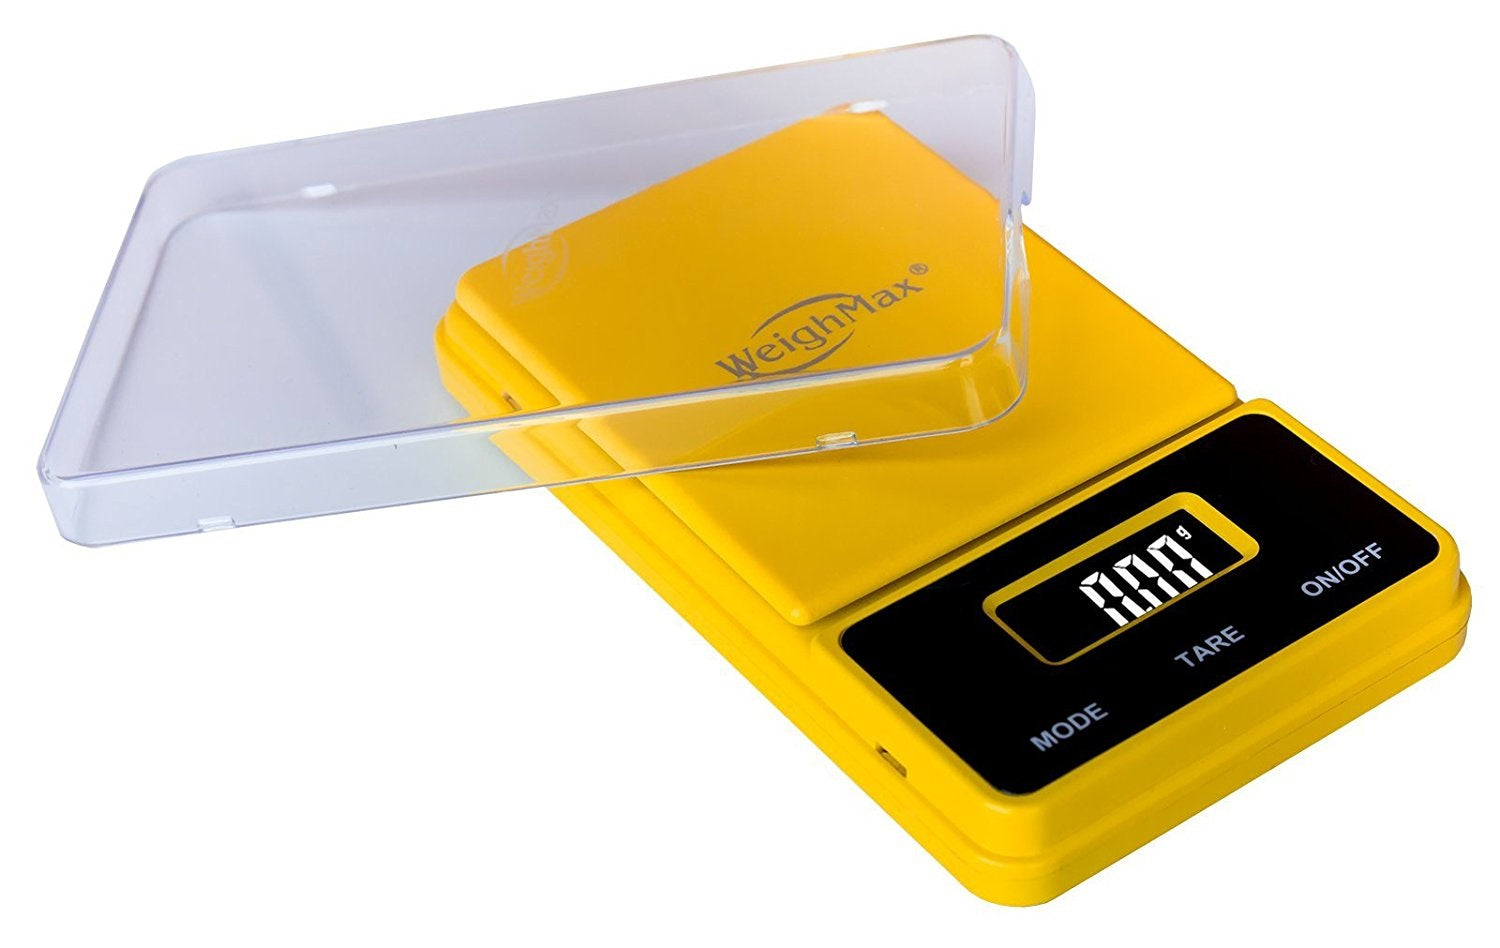 WeighMax | NJ-100 Digital Scale | 100g Capacity - 0.01g Readability - Various Colors Scale Biohazard Inc Yellow  